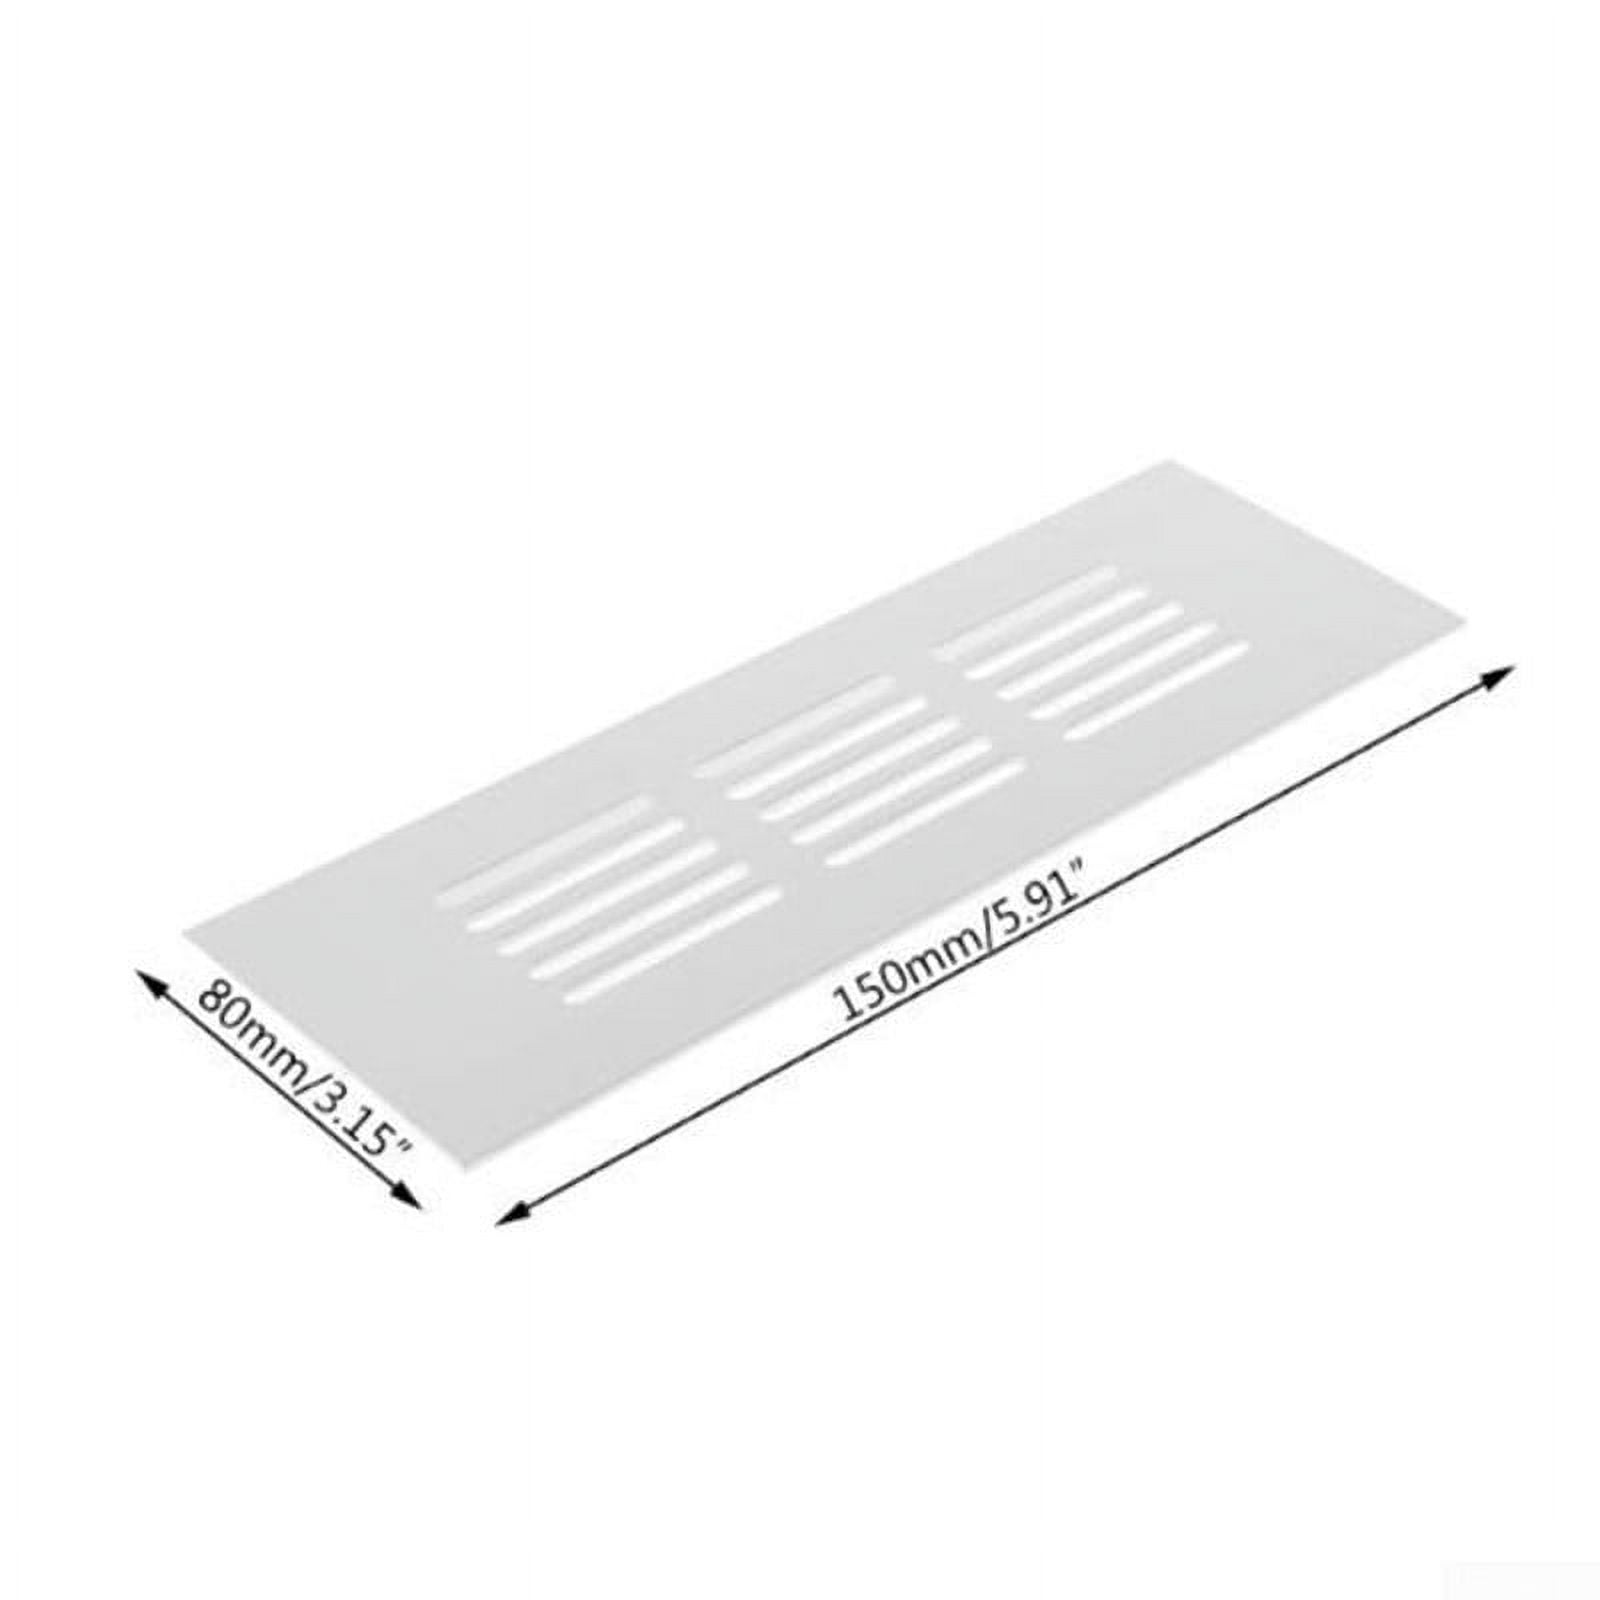 MLfire 4PCS Magnetic Vent Cover 15 x 30cm Rectangle Ventilation Covers  Thick Magnet Cap for Standard Air Registers Home Floor, Wall, Ceiling  Vents, RV, Easy to Cut 